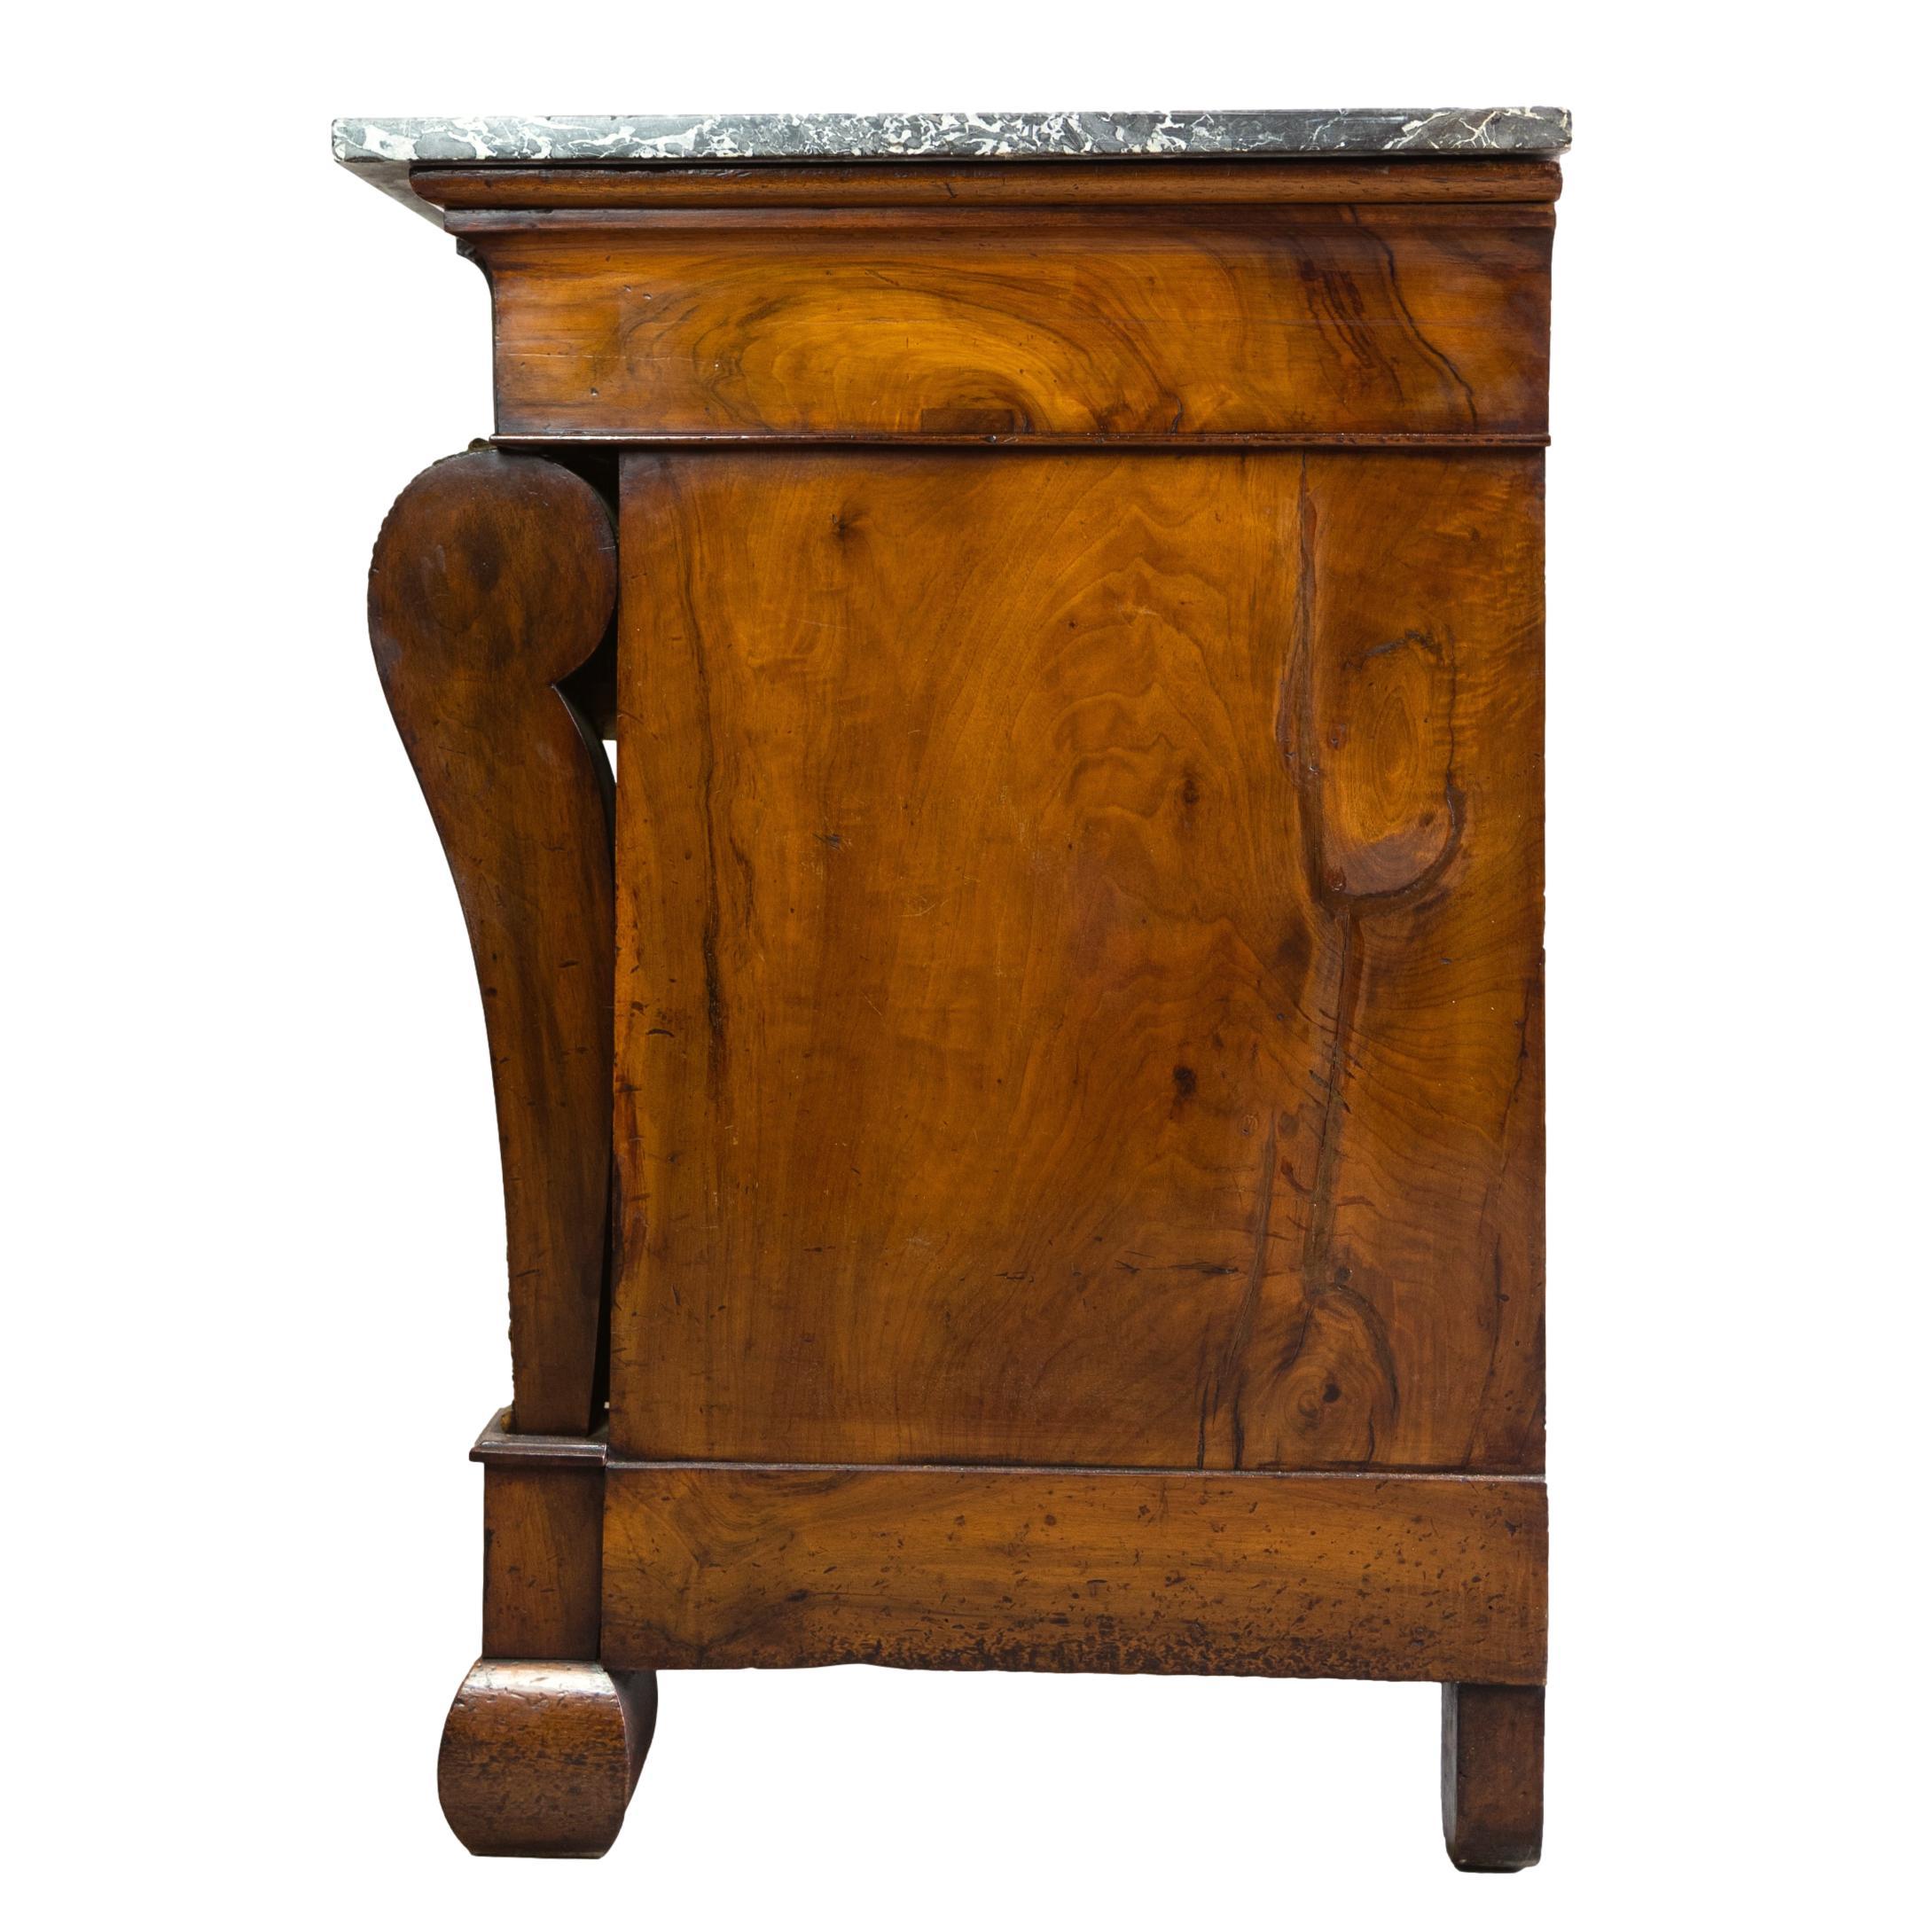 An Empire Ormolu-Mounted Mahogany Commode, Marble Top, French, ca. 1820 For Sale 2